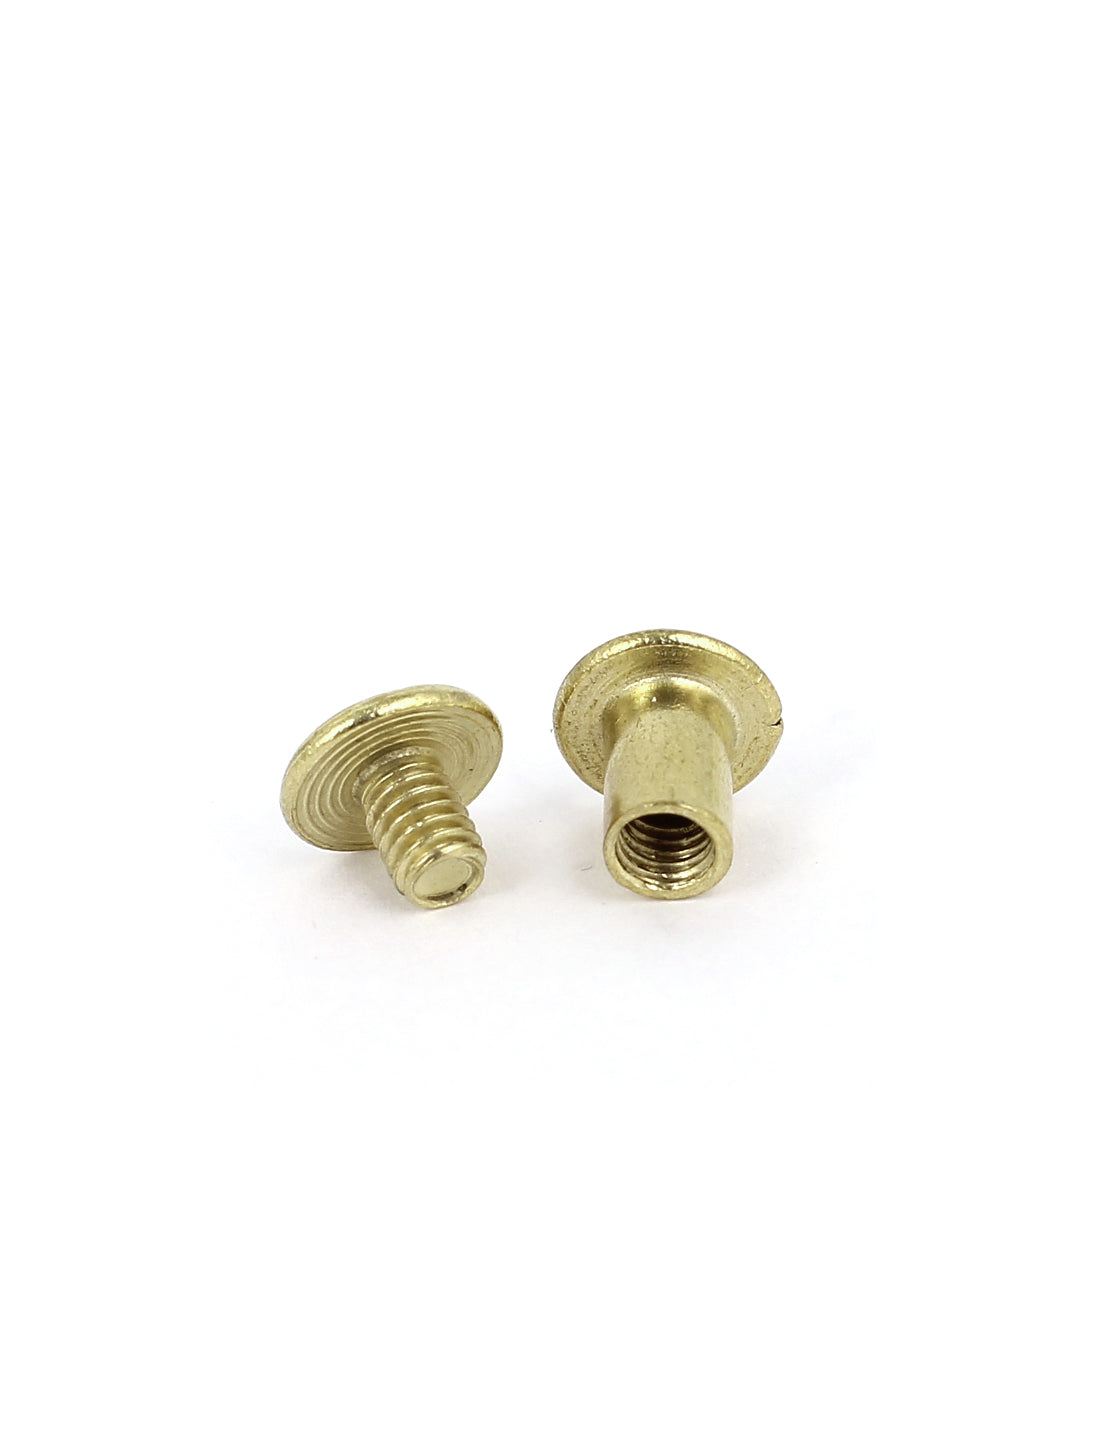 uxcell Uxcell Brass Plated 5x8mm Binding Chicago Screw Post 20pcs for Album Leather Purse